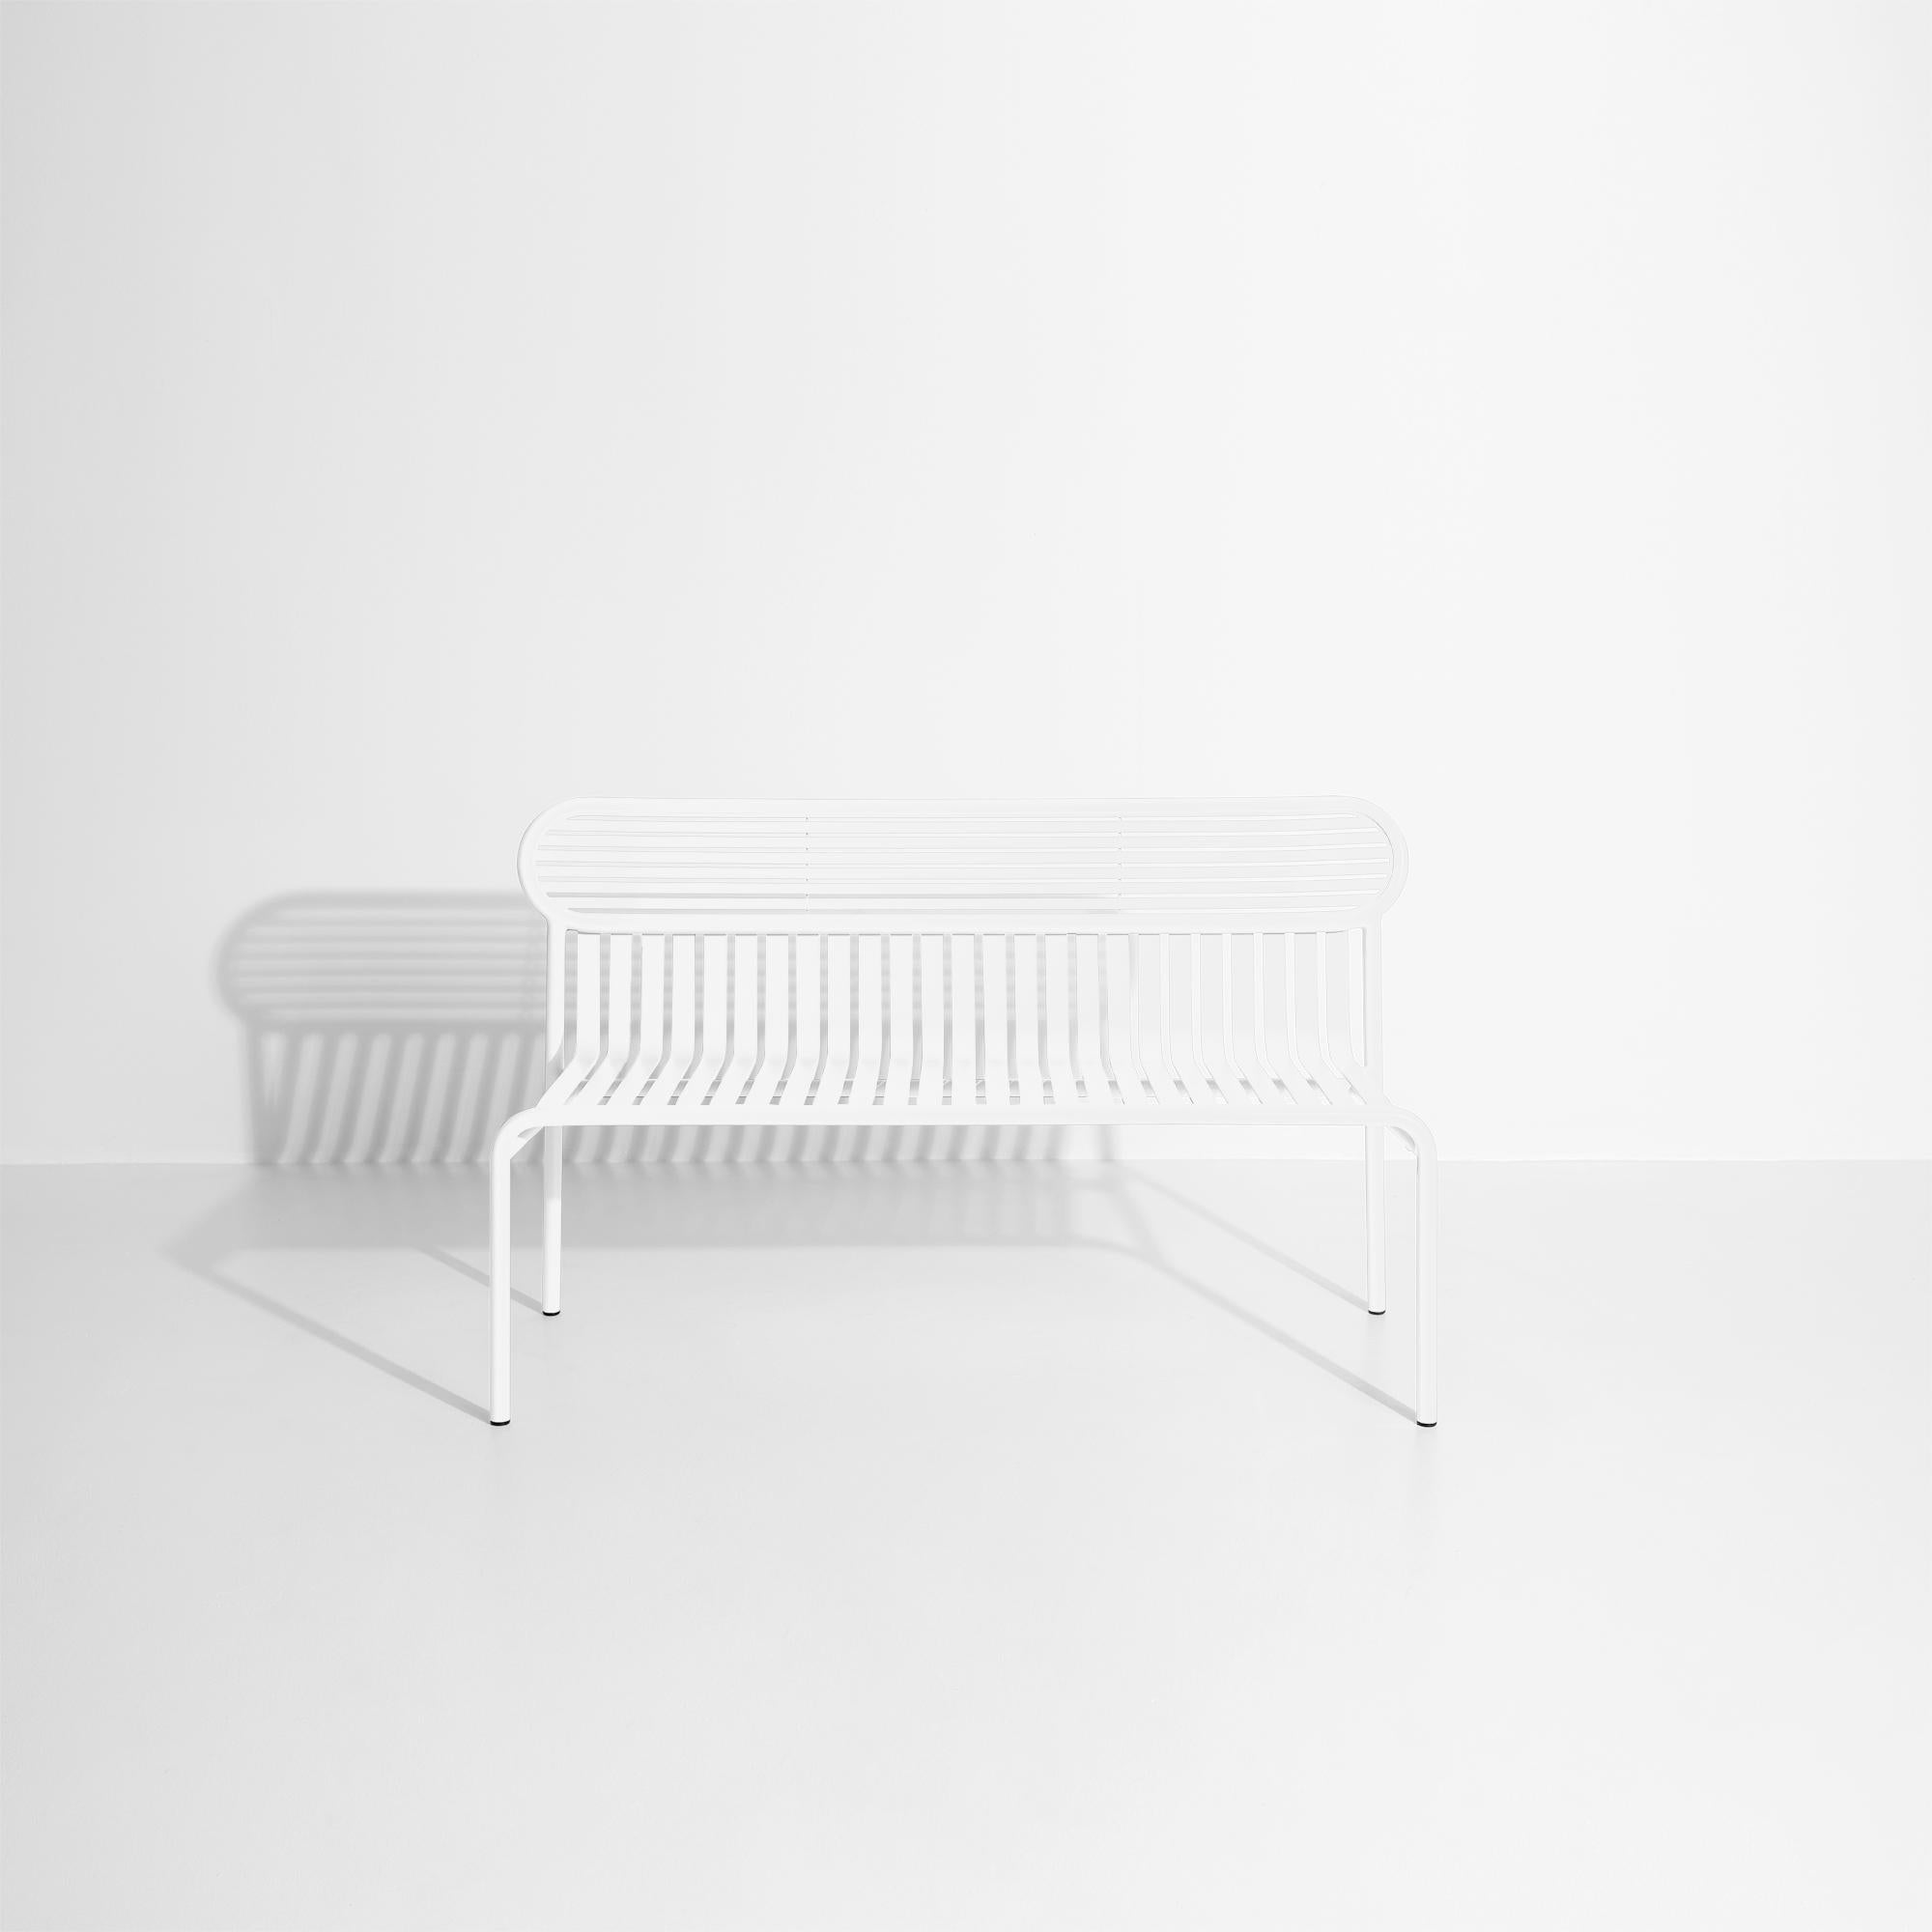 Petite Friture Week-End Bench in White Aluminium by Studio BrichetZiegler For Sale 1